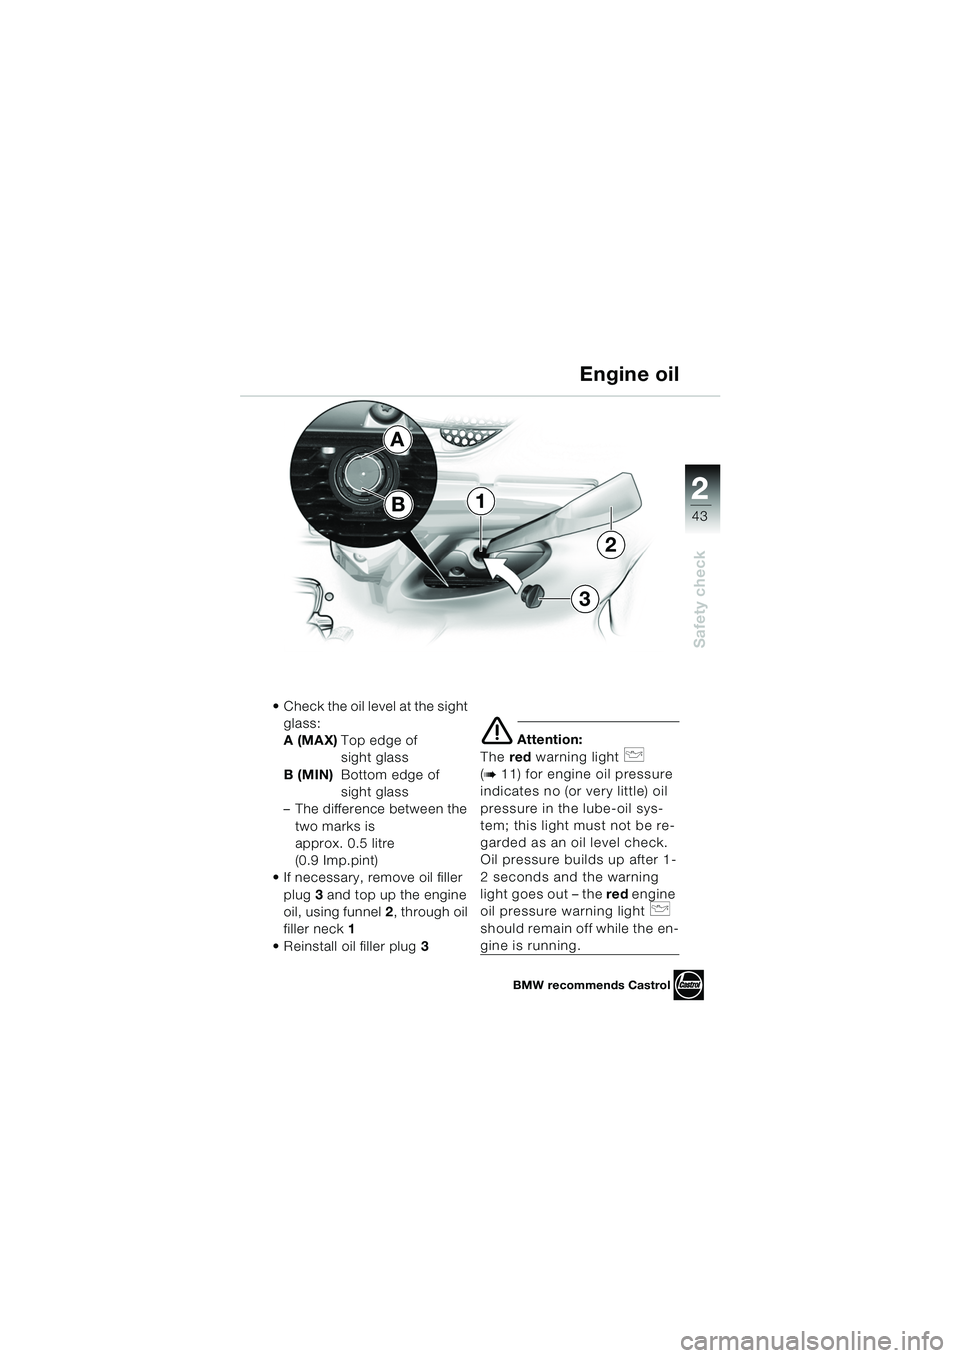 BMW MOTORRAD K 1200 LT 2005  Riders Manual (in English) 22
43
Safety check
Engine oil
 Check the oil level at the sight glass:
A (MAX) Top edge of 
sight glass
B (MIN) Bottom edge of 
sight glass
– The difference between the 
two marks is 
approx. 0.5 l